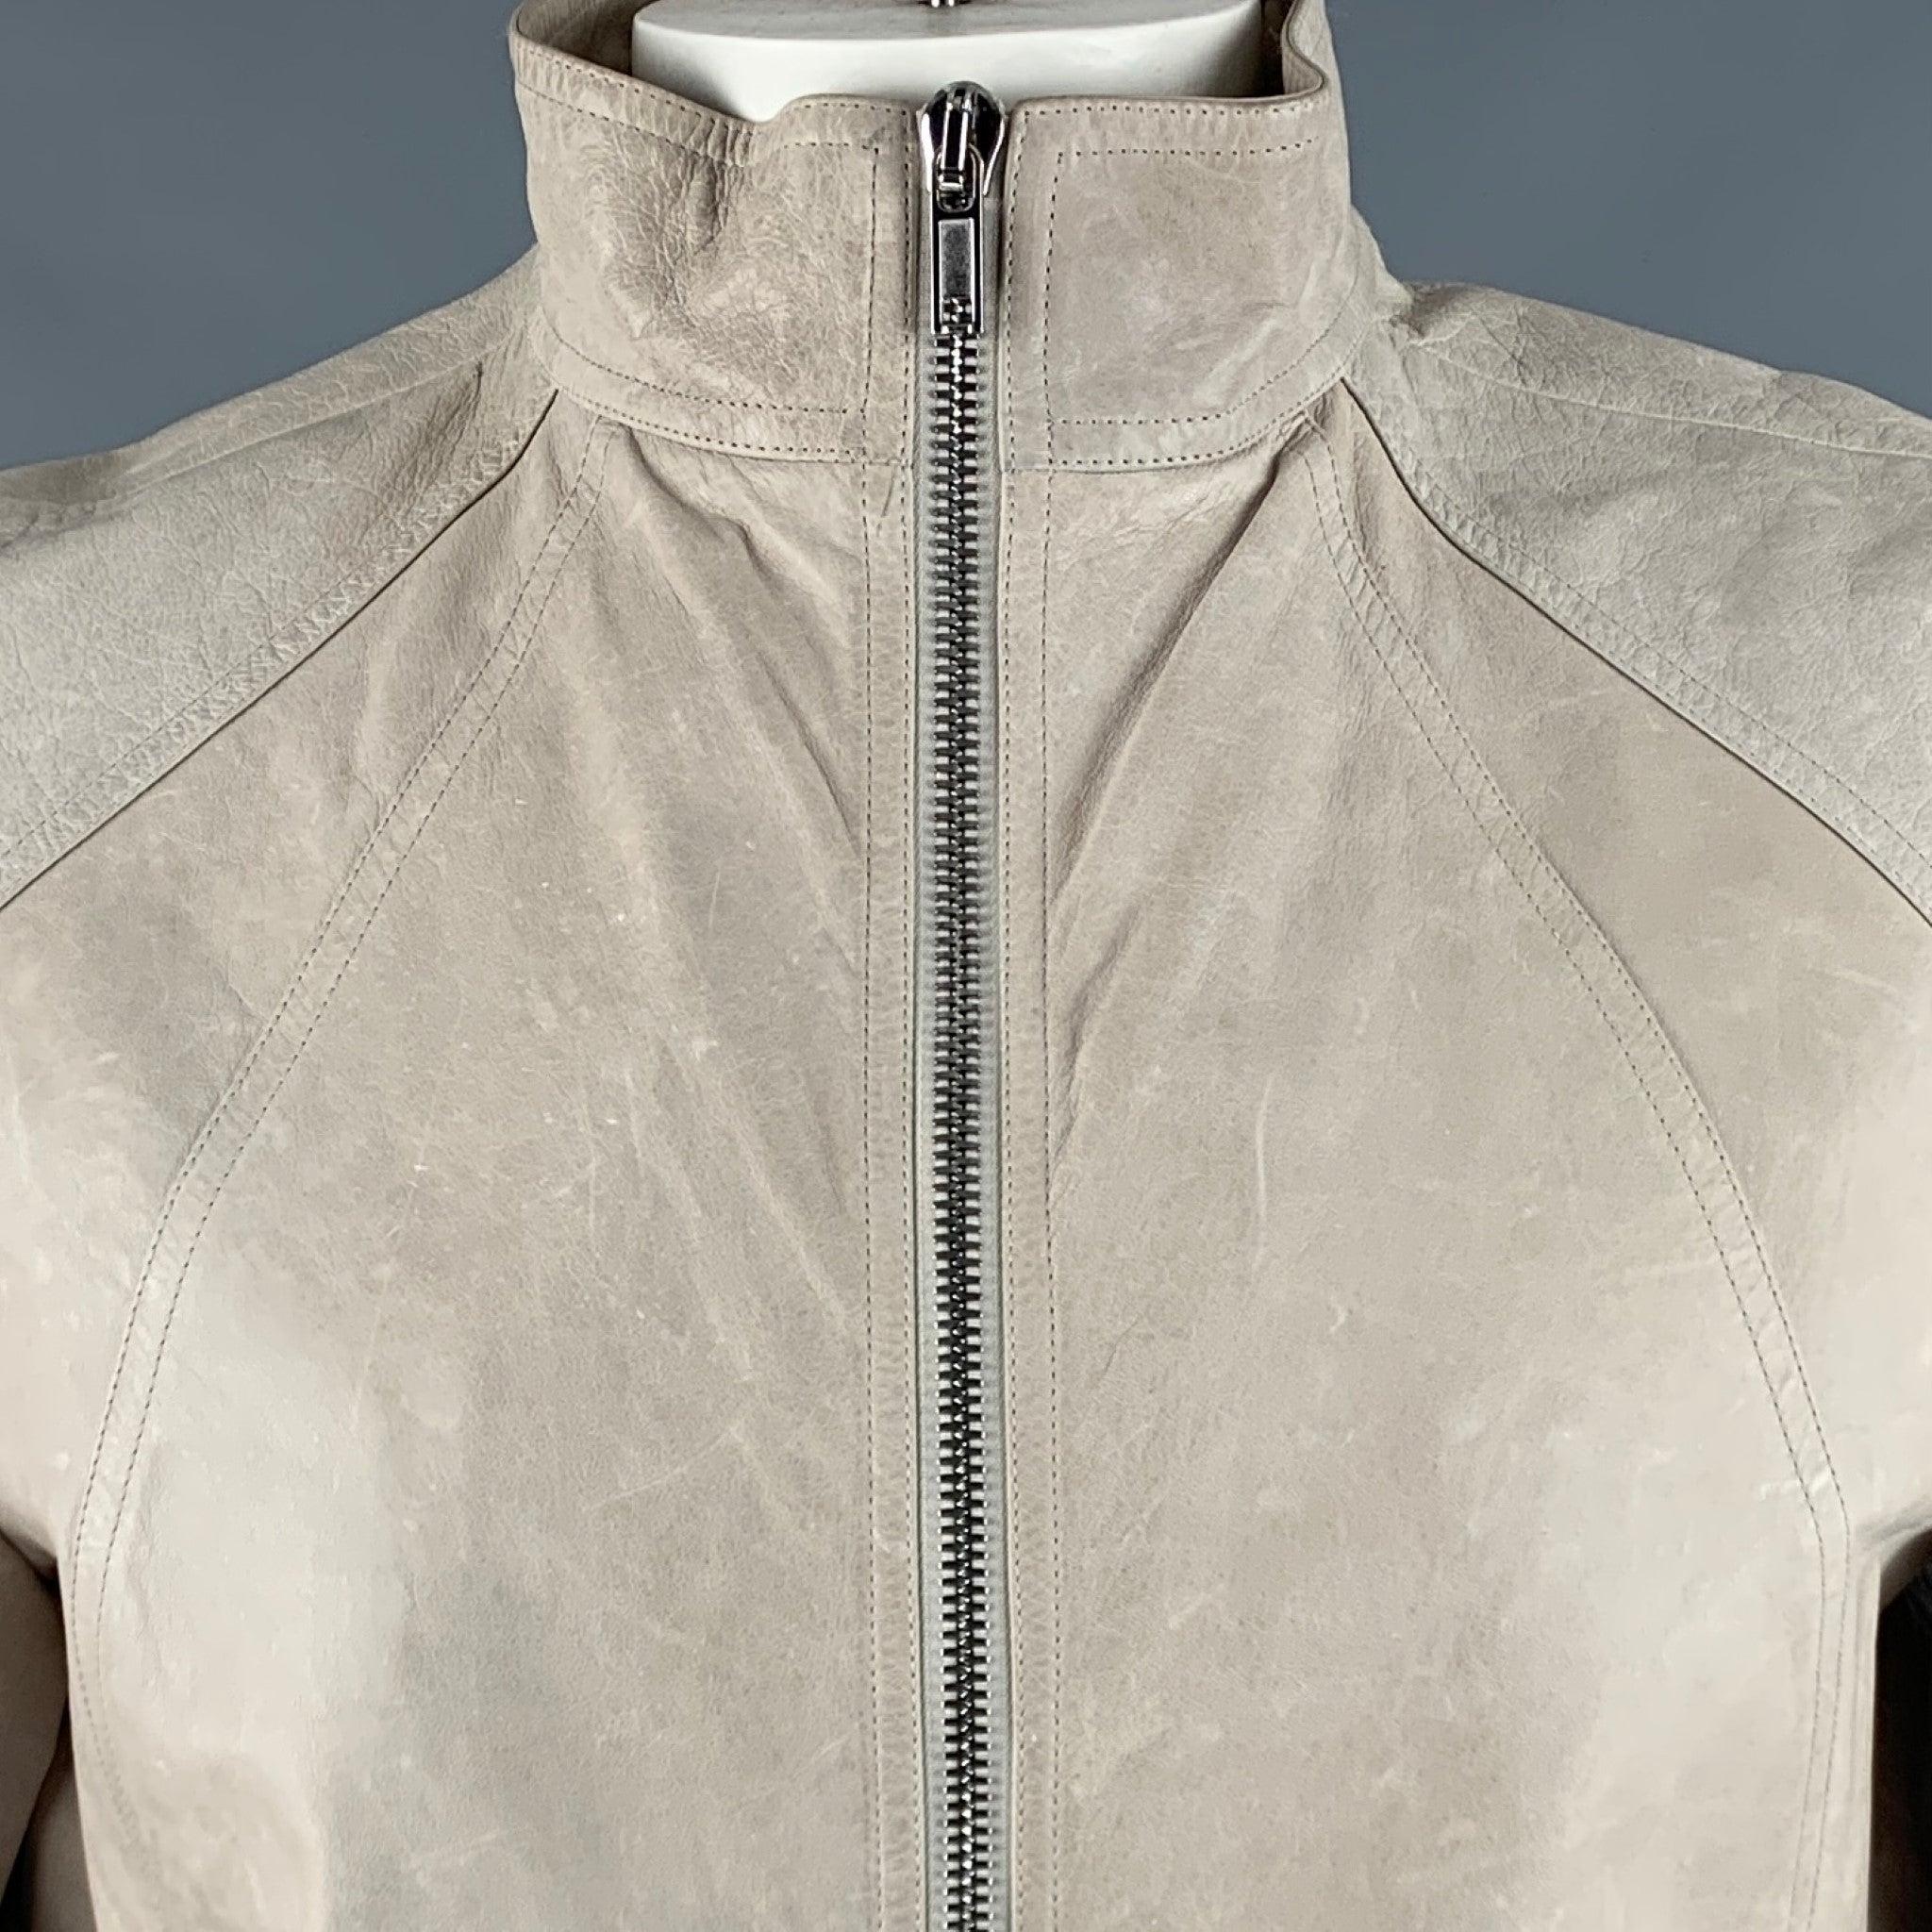 RICK OWENS 2016 jacket
in a grey kangaroo leather fabric featuring ribbed cuffs, and zip up closure. Made in Italy.Very Good Pre-Owned Condition. Minor signs of wear. 

Marked:   44 

Measurements: 
 
Shoulder: 16.5 inches Chest: 44 inches Sleeve: